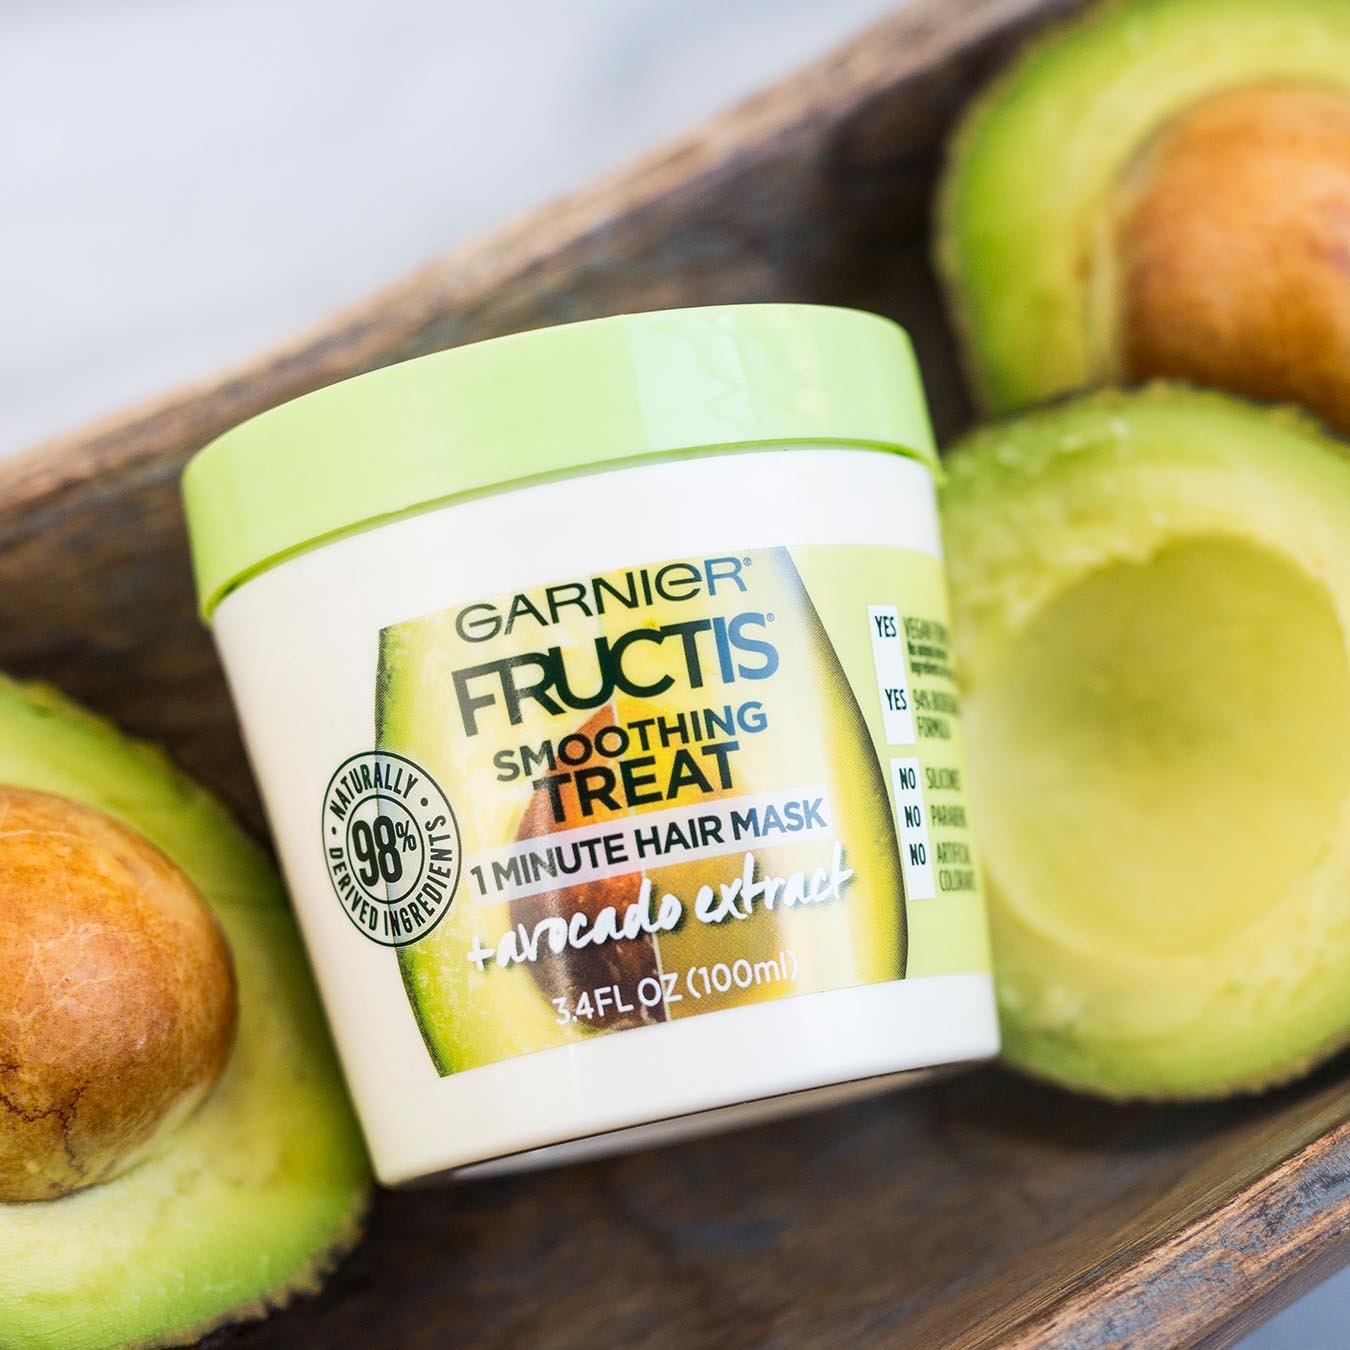 Garnier Fructis Smoothing Treat 1 Minute Hair Mask with Avocado Extract in a wooden trough next to halved avocados on a white marble background.